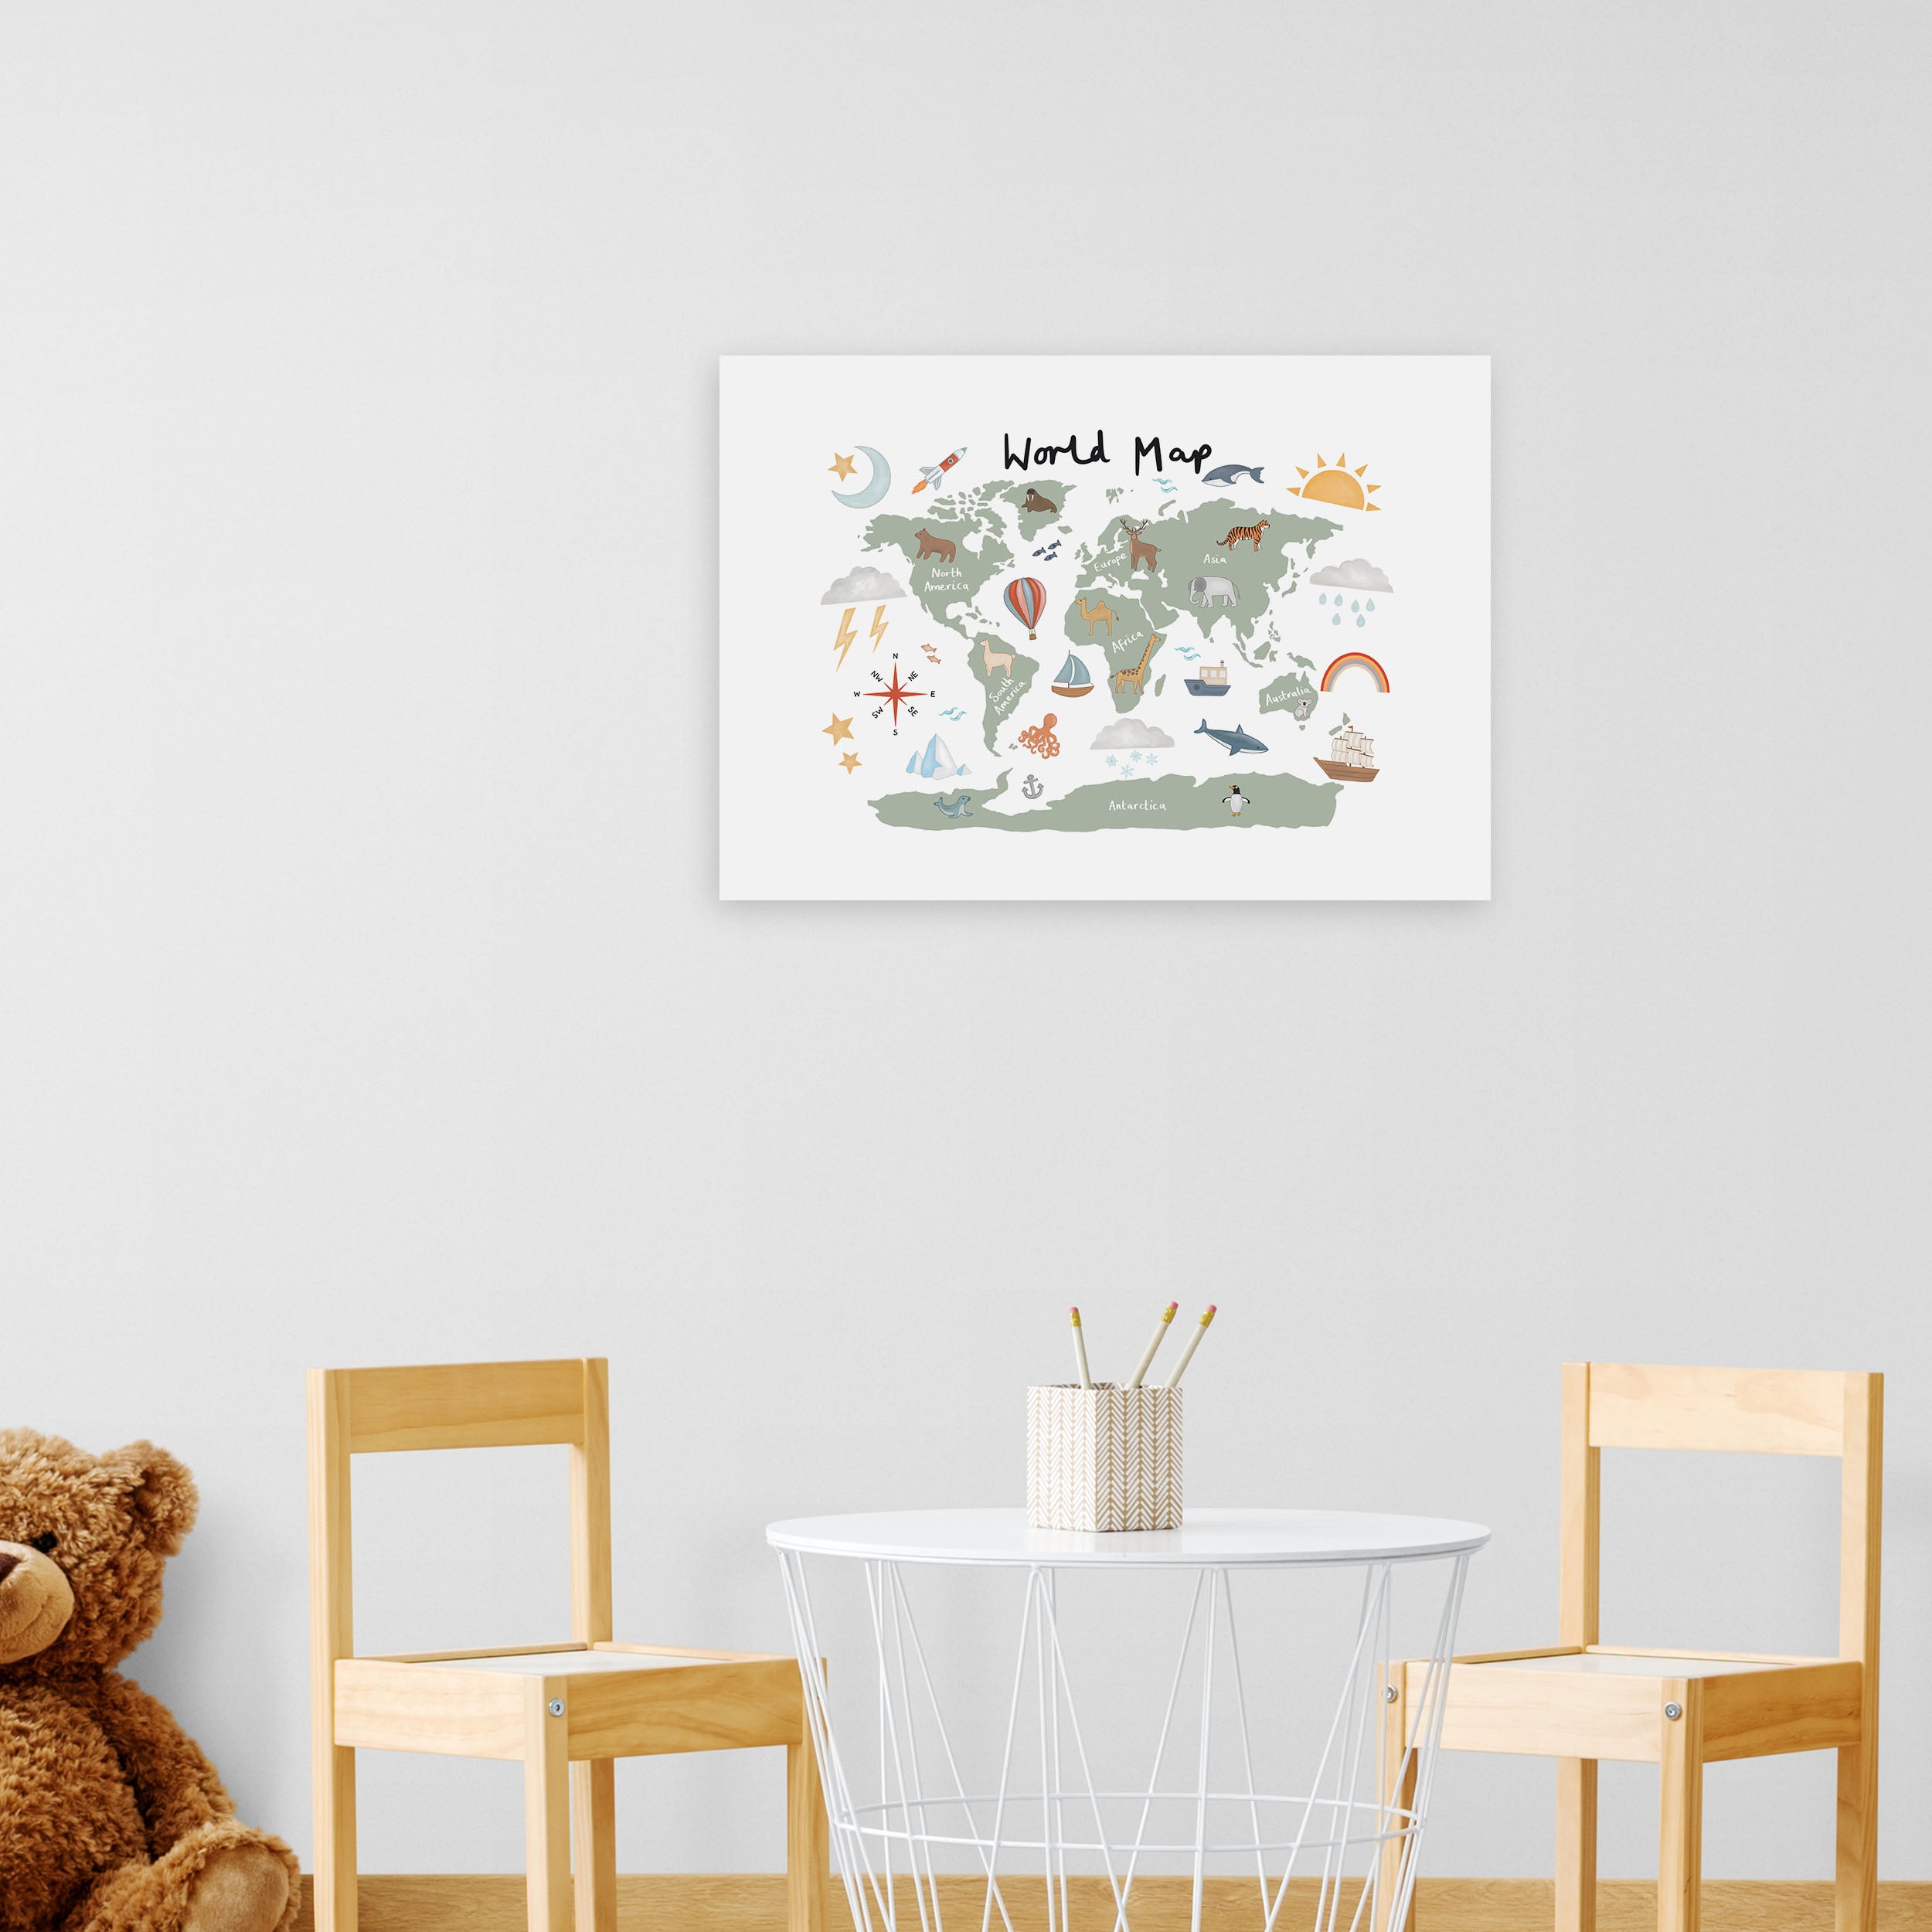 East End Prints World Map in Green Print